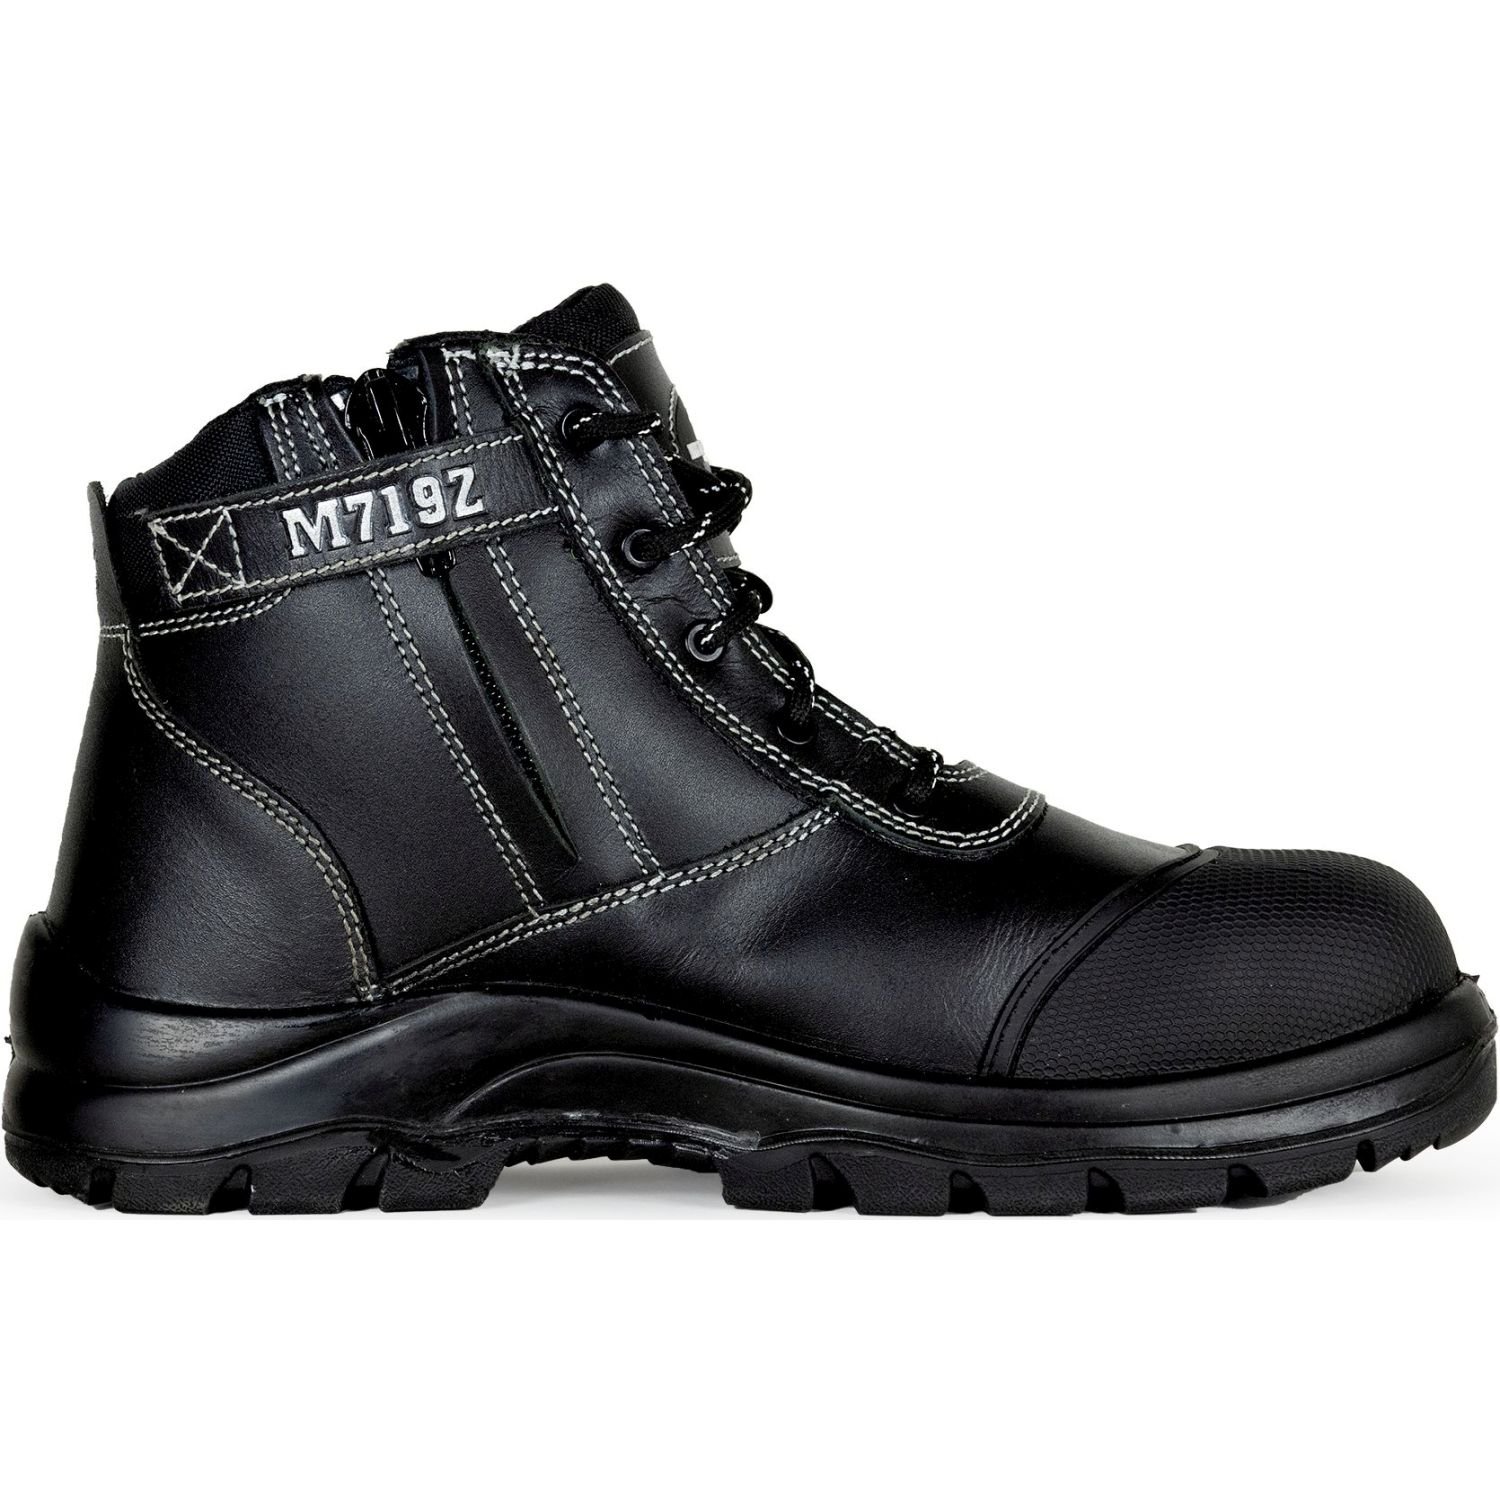 Mustang Wear 719Z Nitrile Sole 300°C EH Lace Up Zip Safety Boot with Scuff Cap